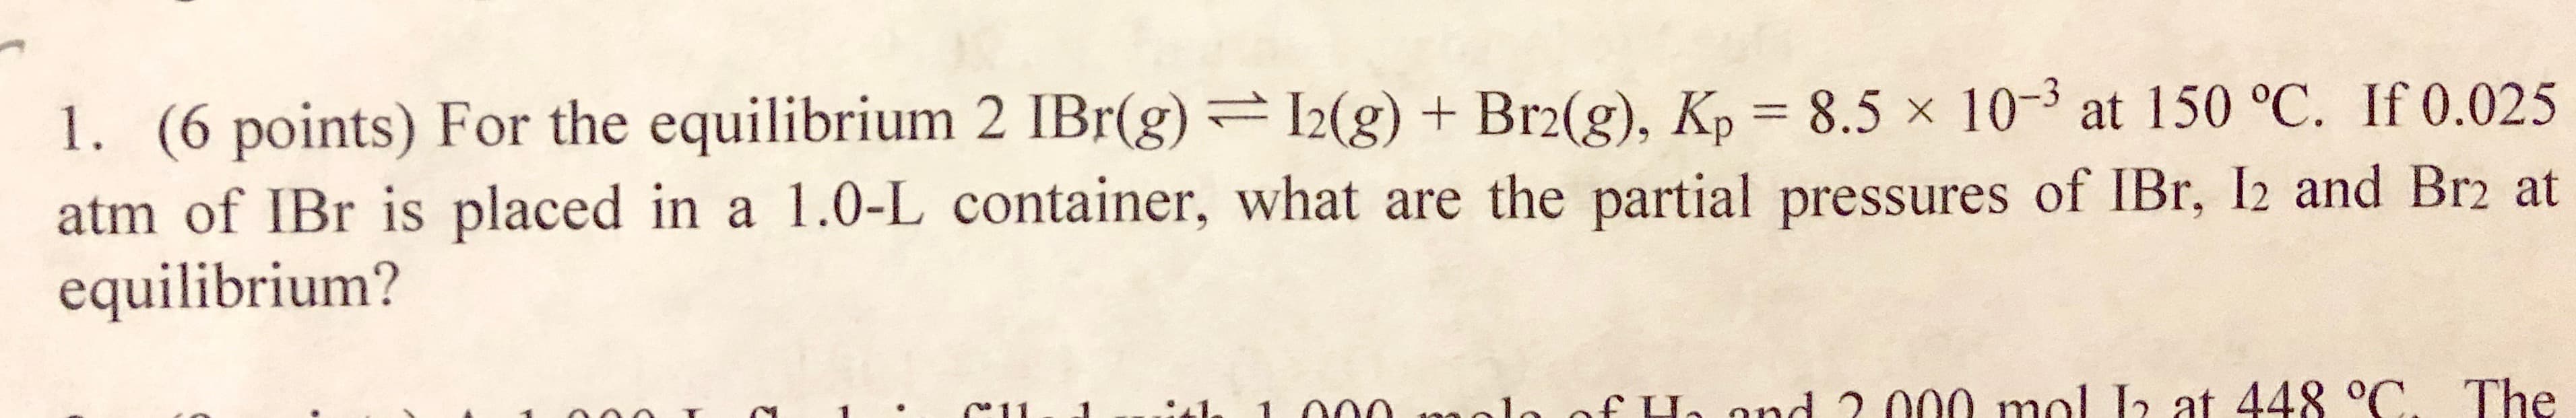 1. (6 points) For the equilibrium 2 IBr(g) g) +Brg), Kp 8.5x 10-3 at 150 °C. If 0.025
atm of IBr is placed in a 1.0-L container, what are the partial pressures of IBr, I2 and Br2 at
equilibrium?
. C1l e fLe nd 2 00o mal
at 44 C. The
